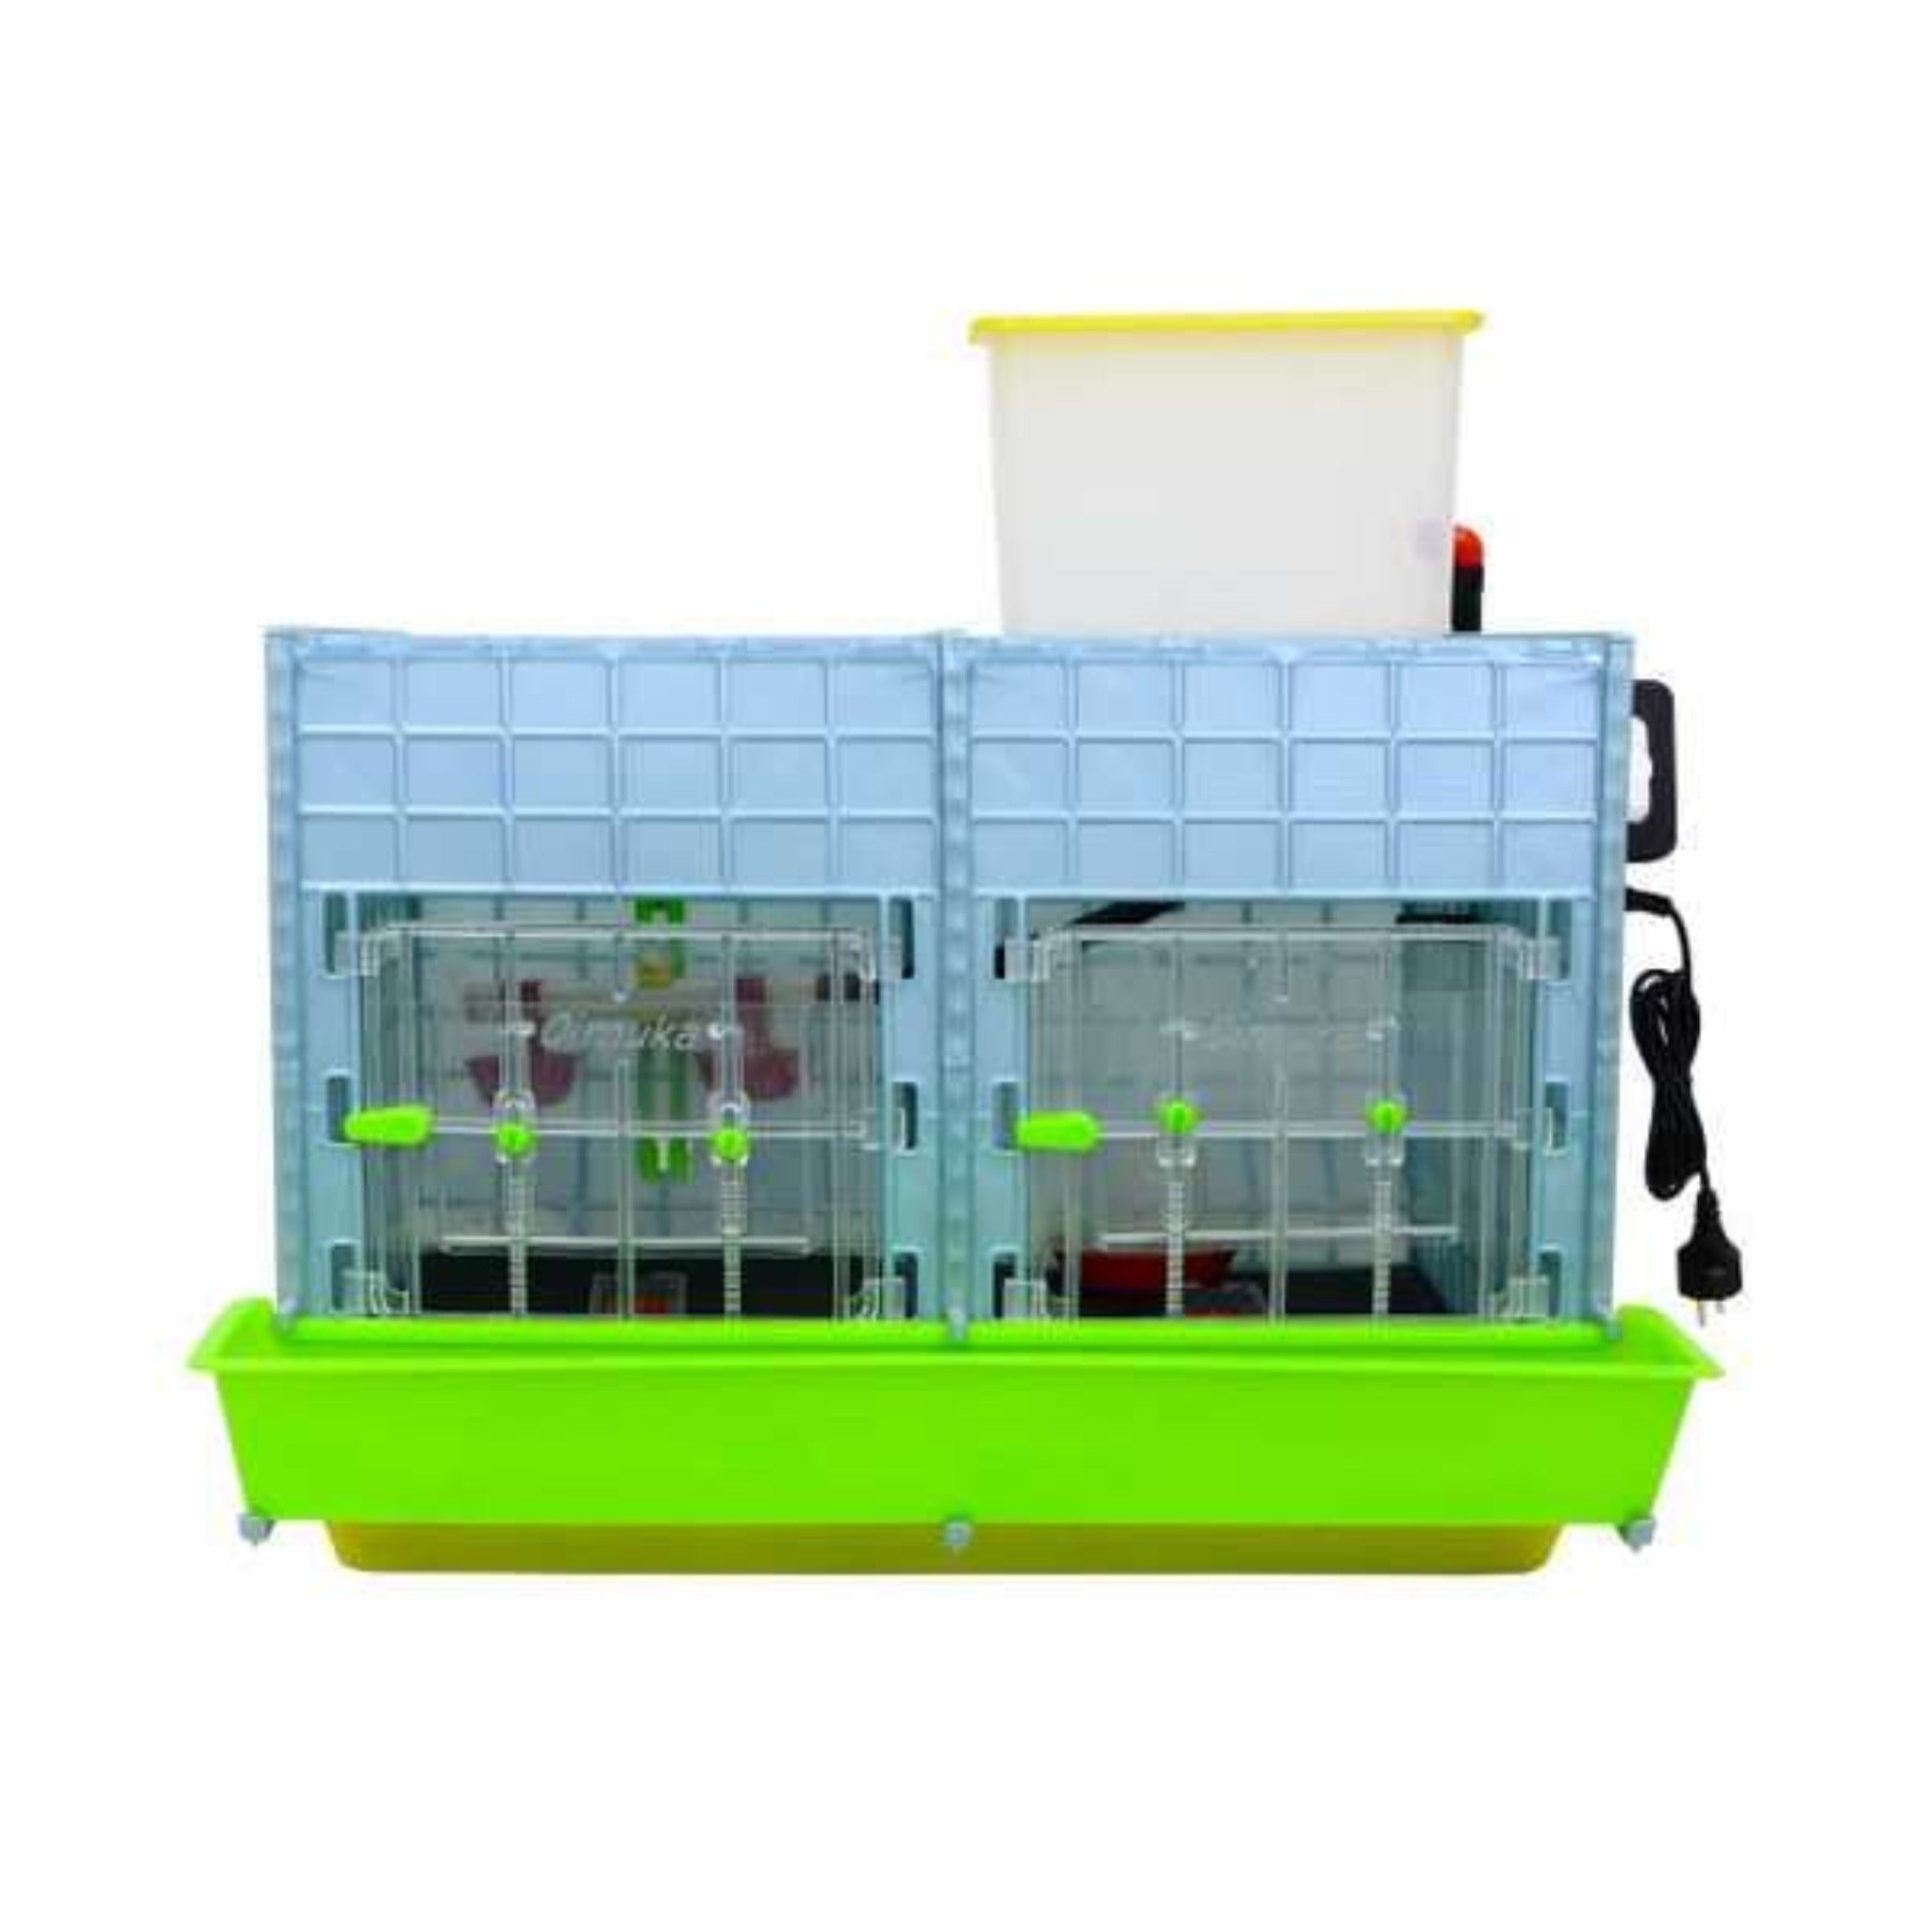 Hatching Time Cimuka Front facing CB40 2 Section 15 inch Chick Brooder Front showing closed clear plastic doors with locks, water tank is on top of the brooder for drinker system. Green feeding trough mounted to front of brooder.